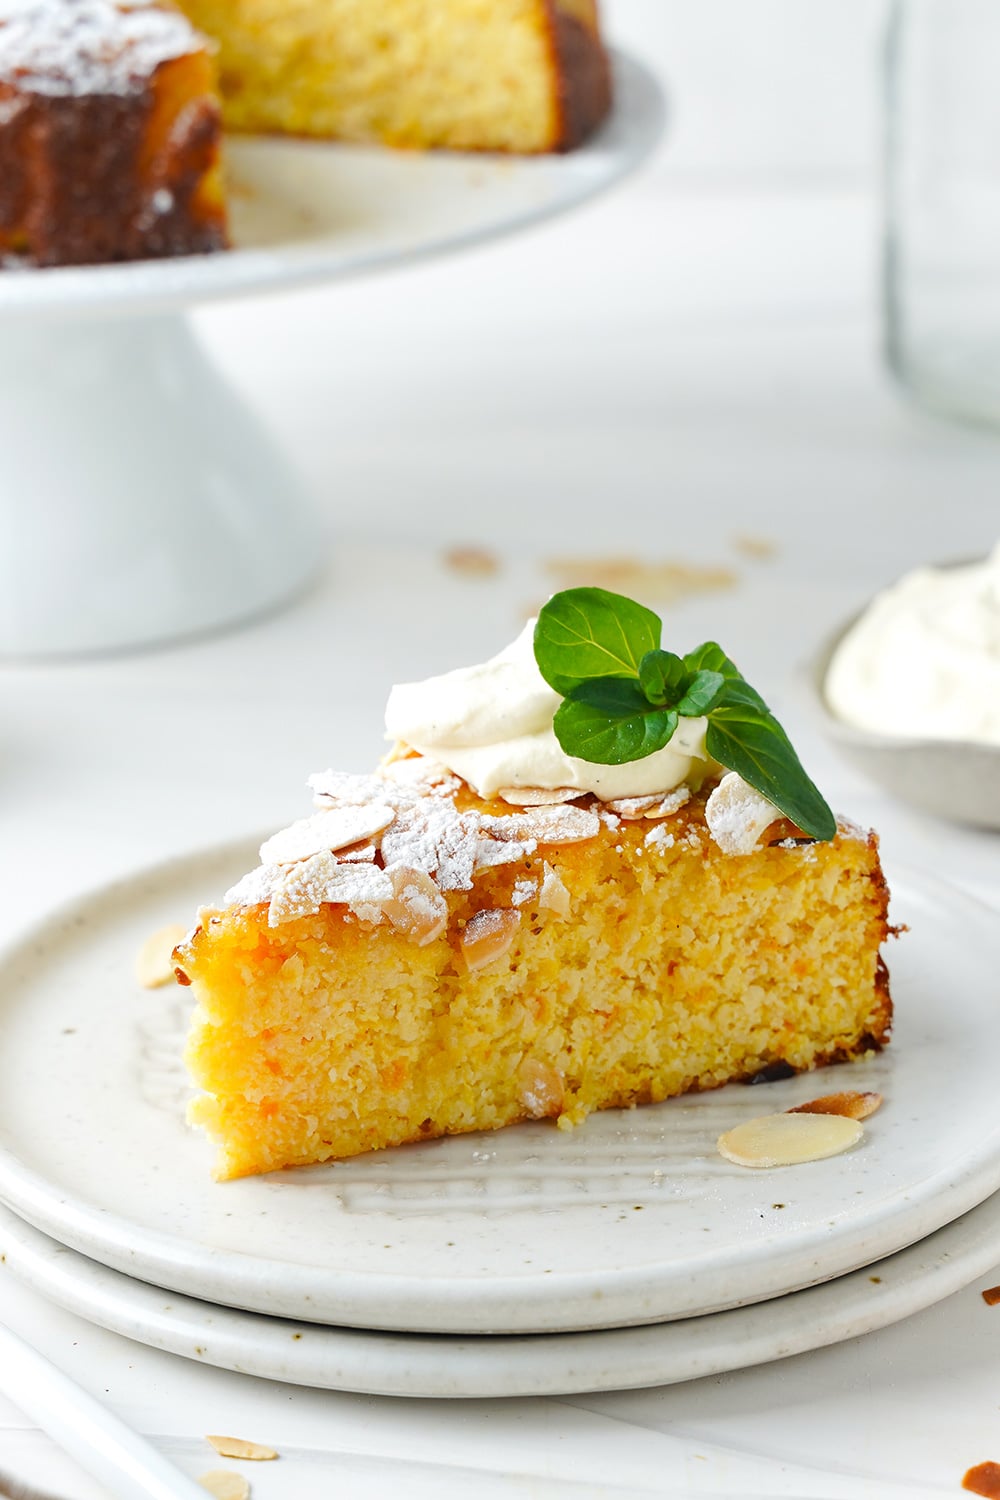 Orange Cake With Almond Meal